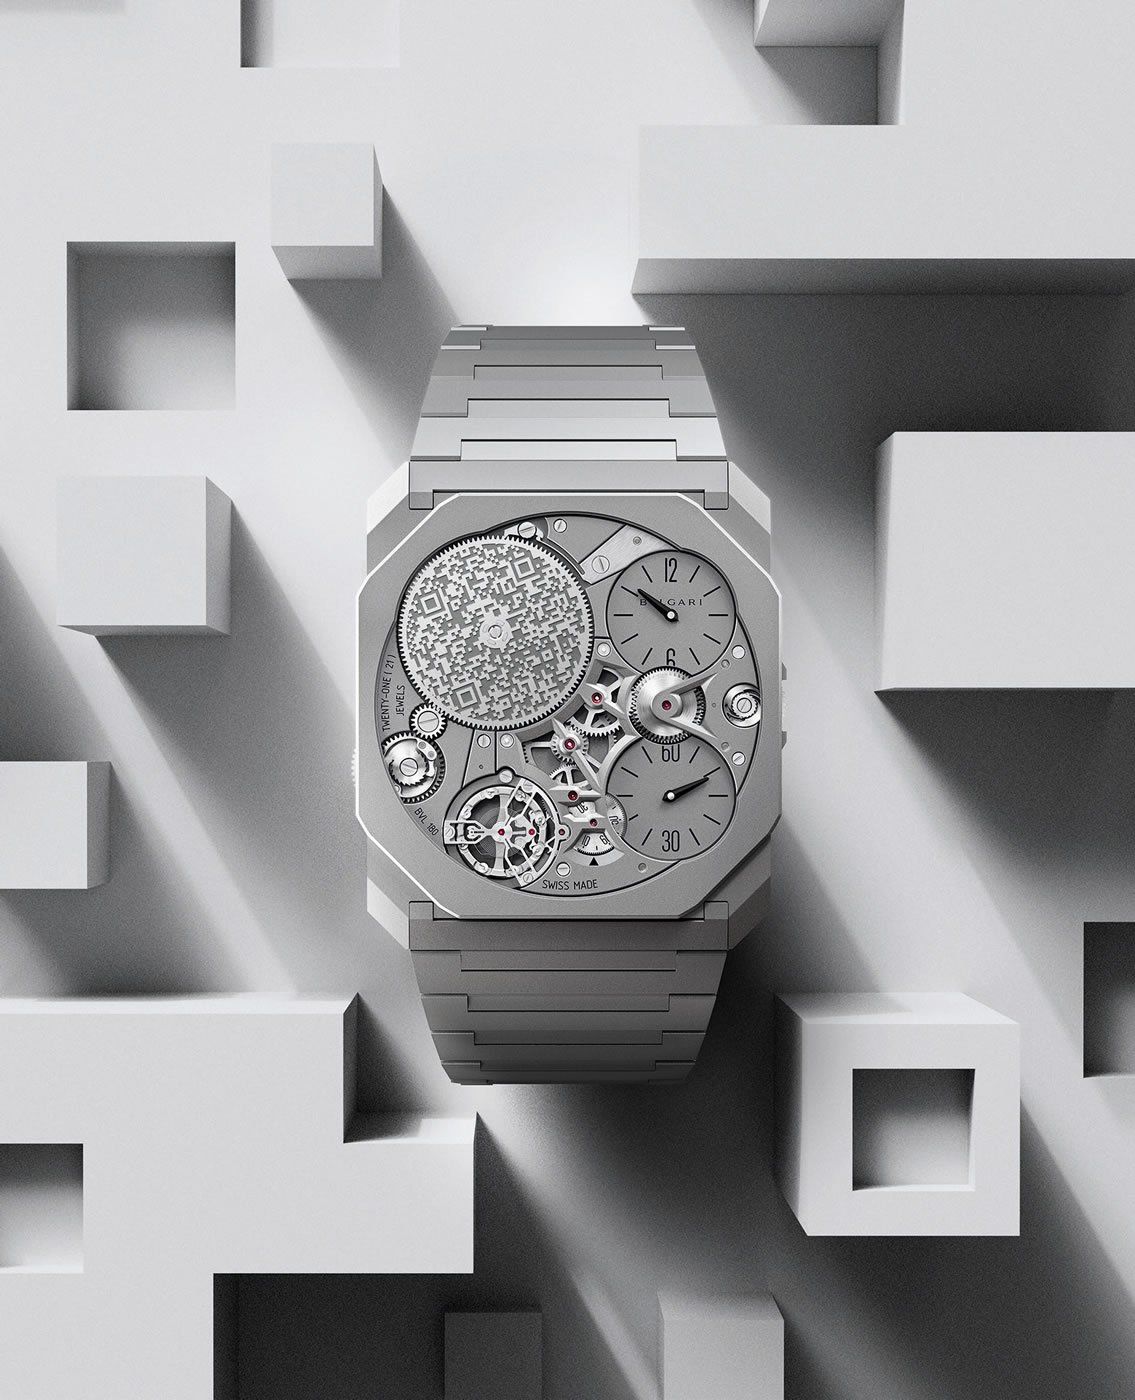 Bulgari Octo Finissimo Ultra with the laser etched QR code to access the virtual dimension, Limited to 10 pieces.